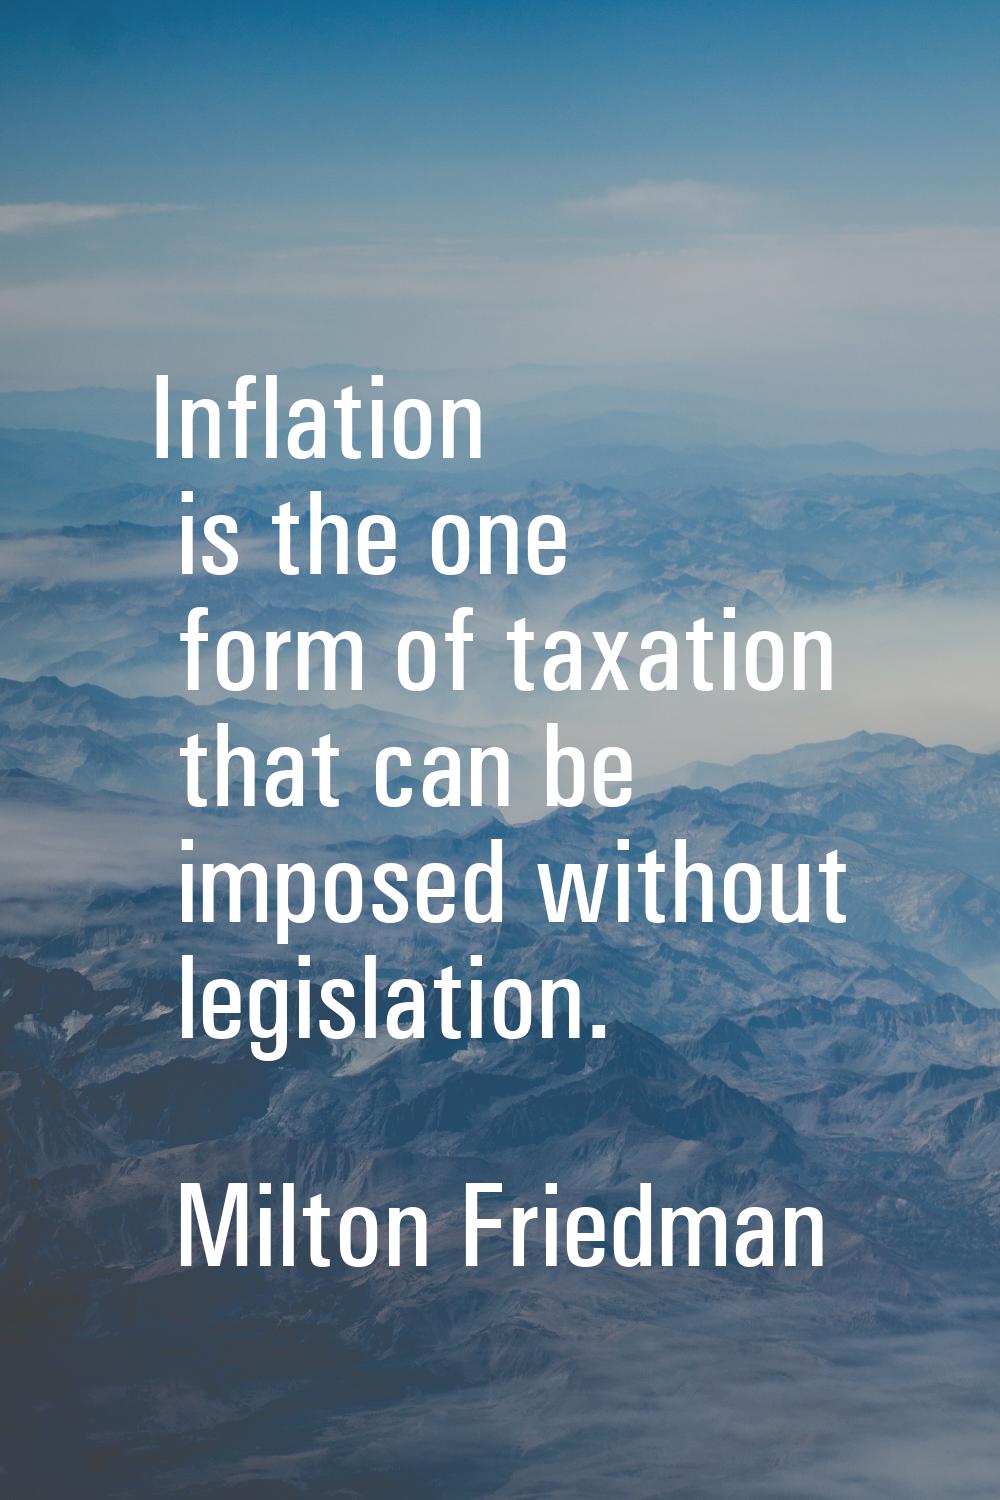 Inflation is the one form of taxation that can be imposed without legislation.